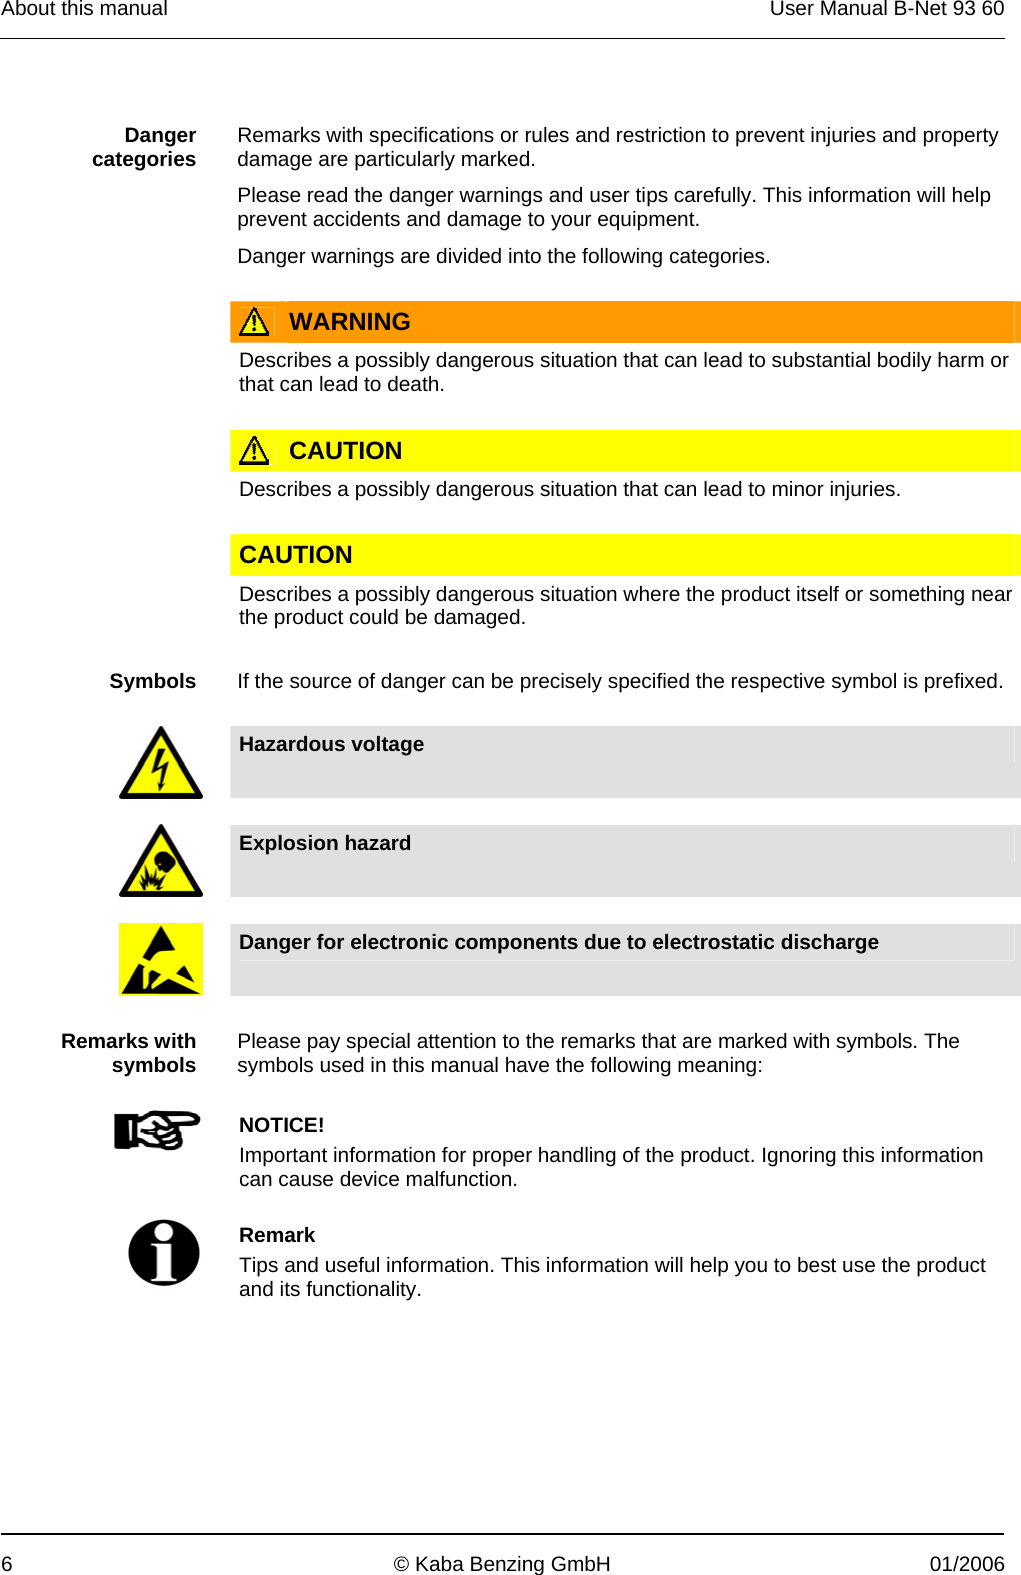 About this manual  User Manual B-Net 93 60 6  © Kaba Benzing GmbH  01/2006    Danger categories  Remarks with specifications or rules and restriction to prevent injuries and property damage are particularly marked. Please read the danger warnings and user tips carefully. This information will help prevent accidents and damage to your equipment. Danger warnings are divided into the following categories.      WARNING  Describes a possibly dangerous situation that can lead to substantial bodily harm or that can lead to death.      CAUTION  Describes a possibly dangerous situation that can lead to minor injuries.     CAUTION  Describes a possibly dangerous situation where the product itself or something near the product could be damaged.    Symbols  If the source of danger can be precisely specified the respective symbol is prefixed.     Hazardous voltage     Explosion hazard     Danger for electronic components due to electrostatic discharge    Remarks with symbols  Please pay special attention to the remarks that are marked with symbols. The symbols used in this manual have the following meaning:   NOTICE! Important information for proper handling of the product. Ignoring this information can cause device malfunction.    Remark Tips and useful information. This information will help you to best use the product and its functionality.  